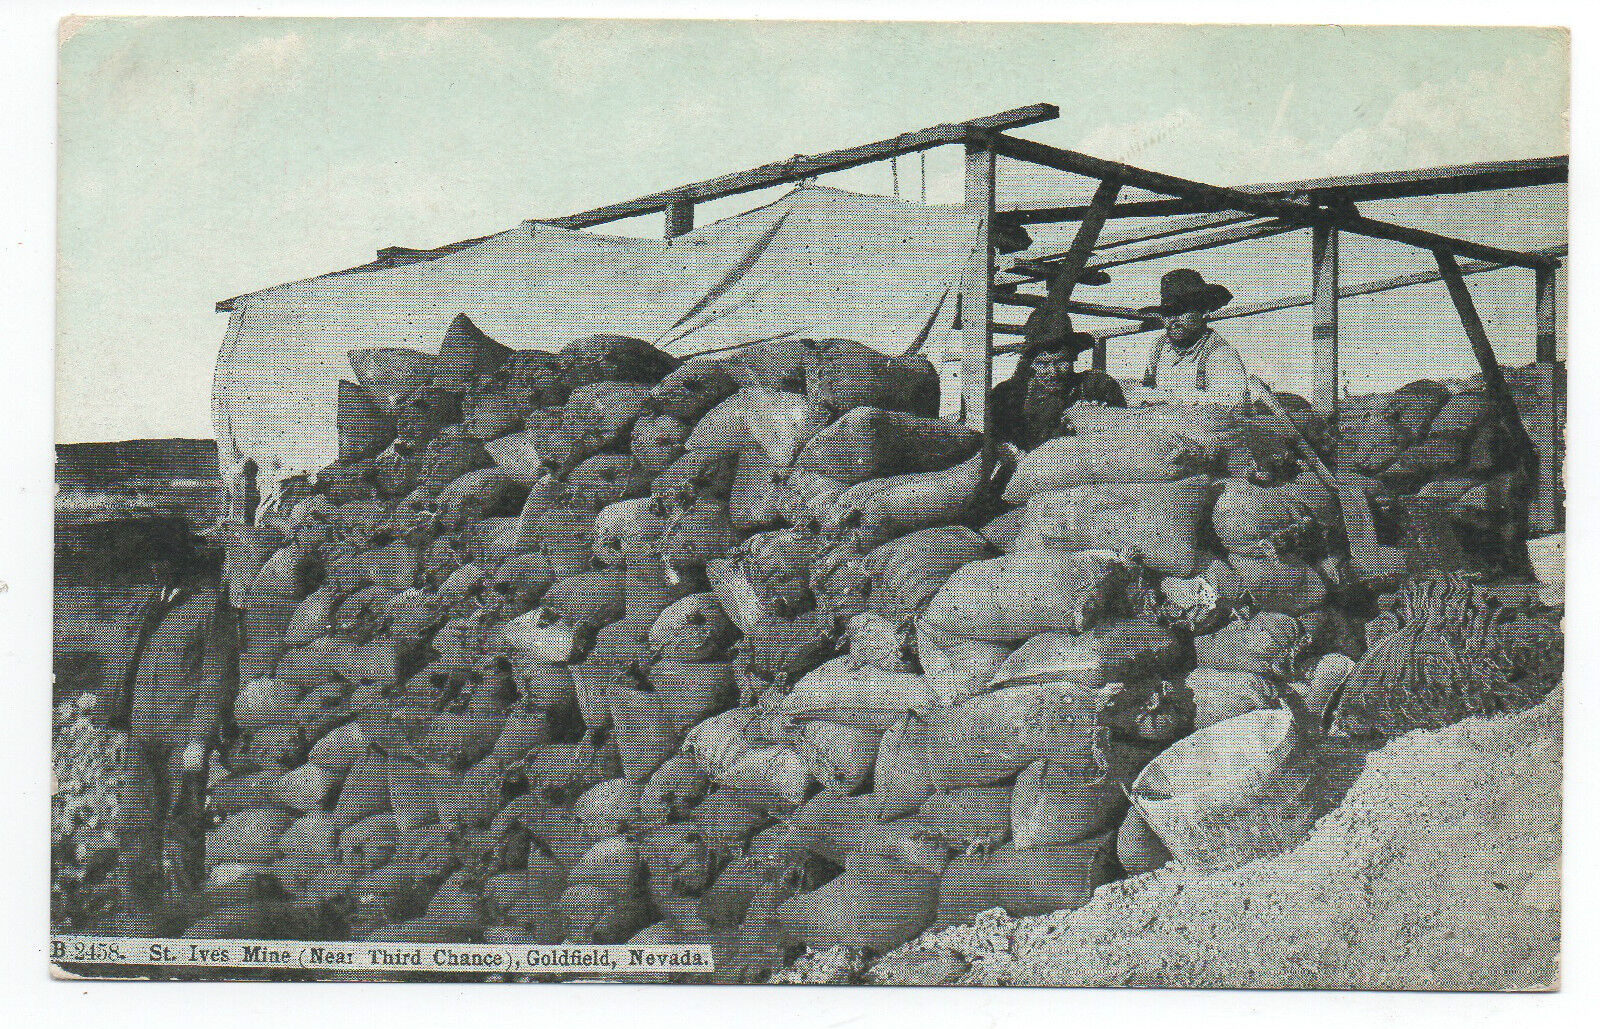 1910 Postcard of the St Ives Mine at Goldfield Nevada